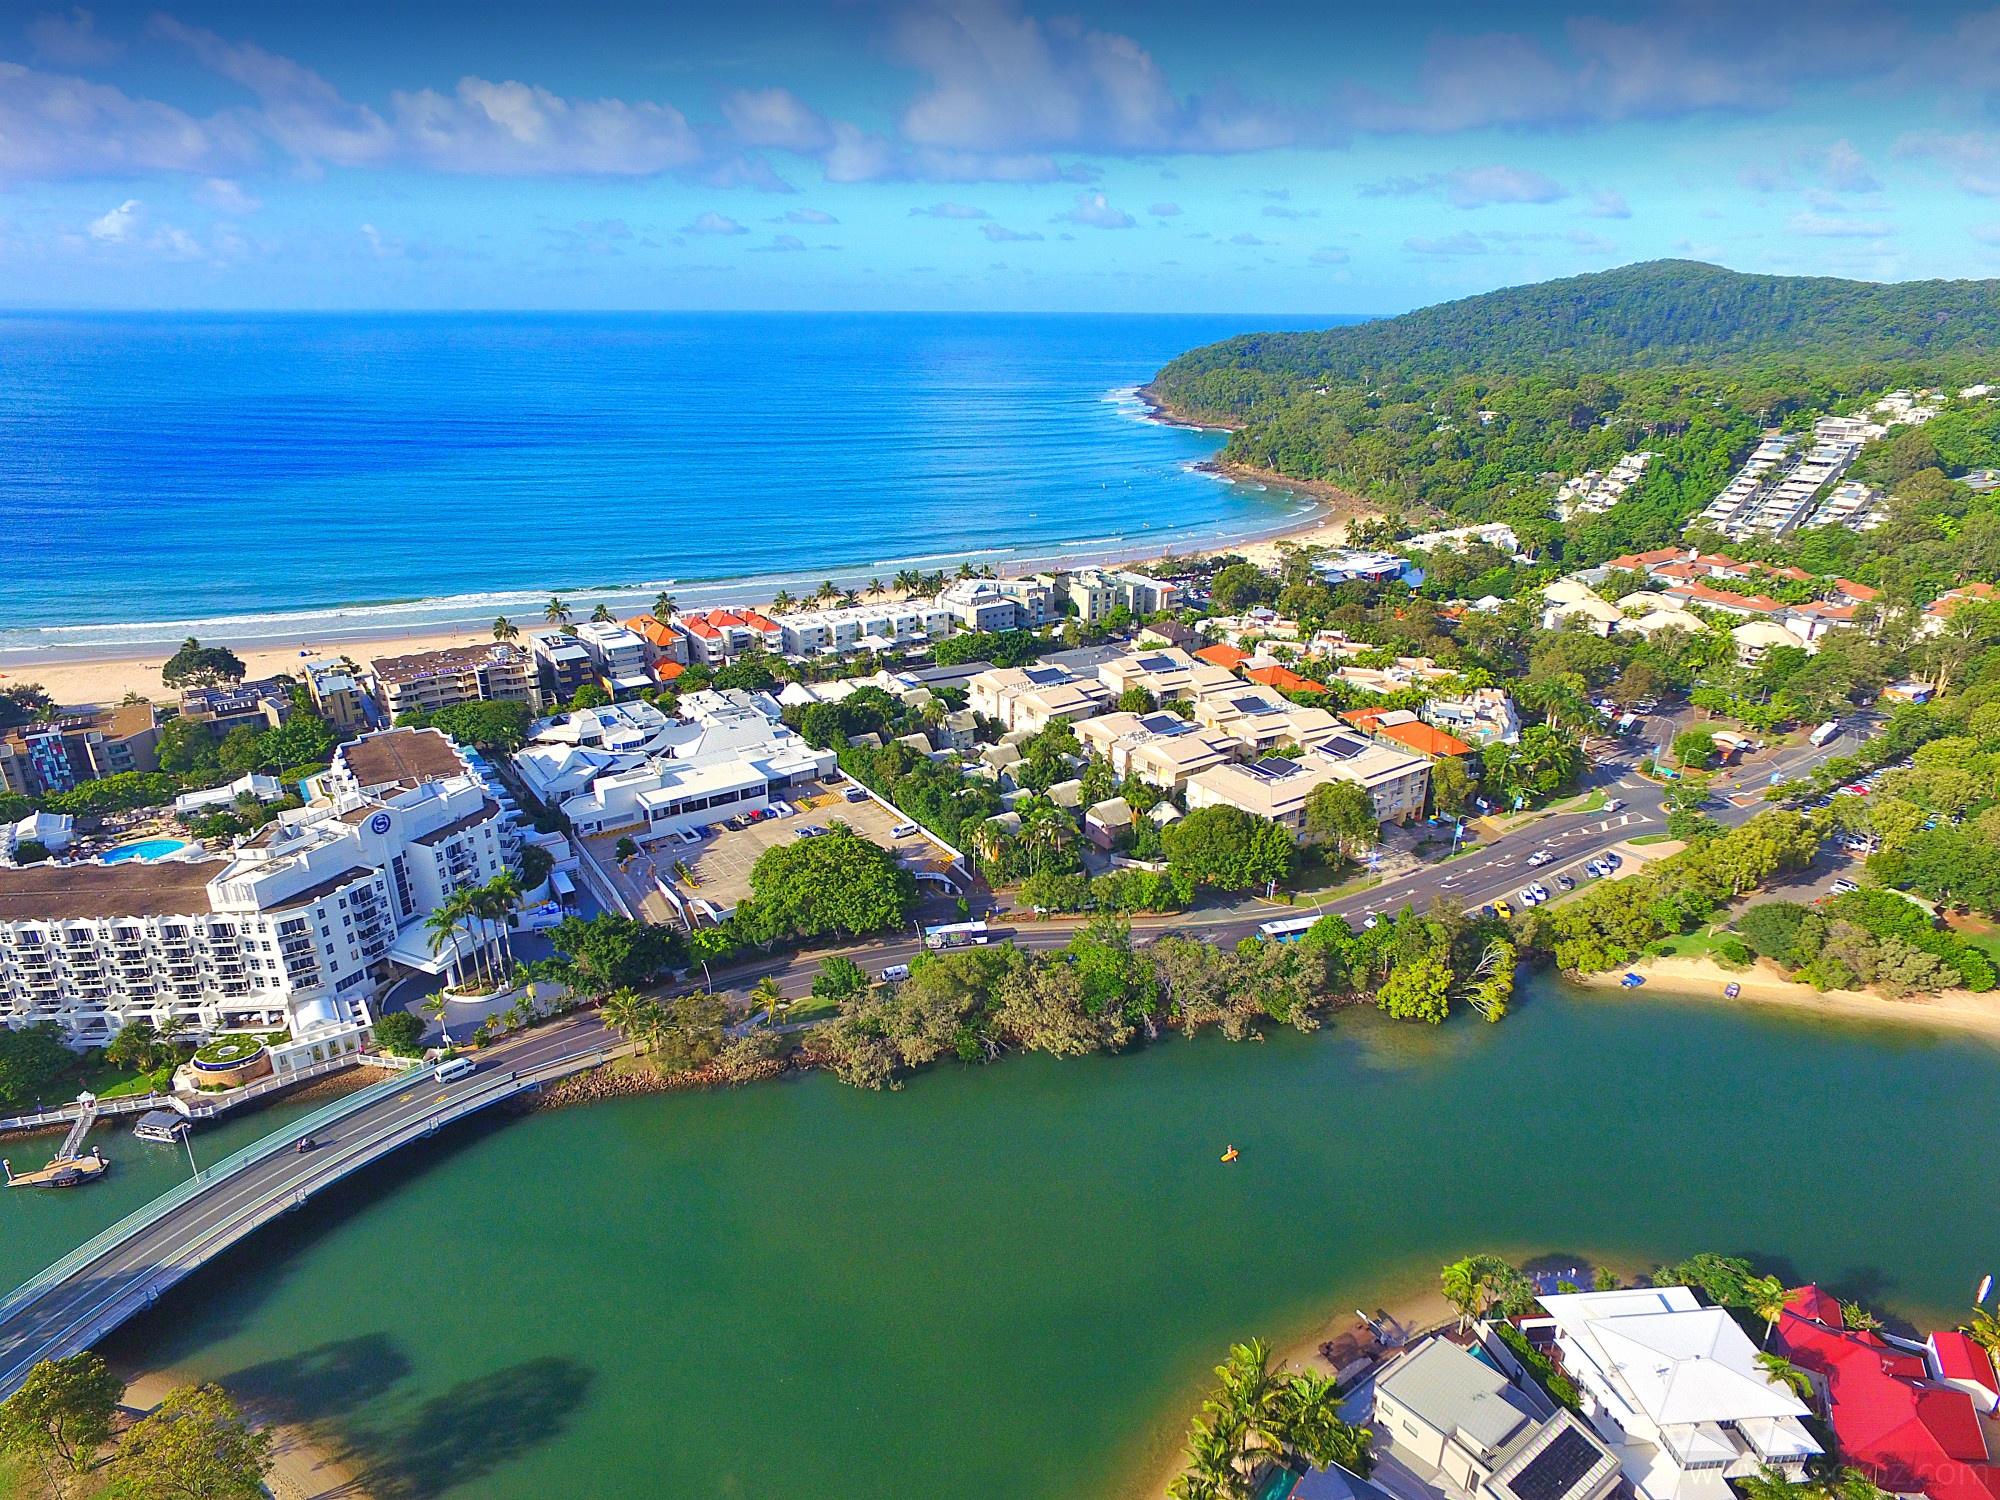 An Insider's Guide to the Sunshine Coast